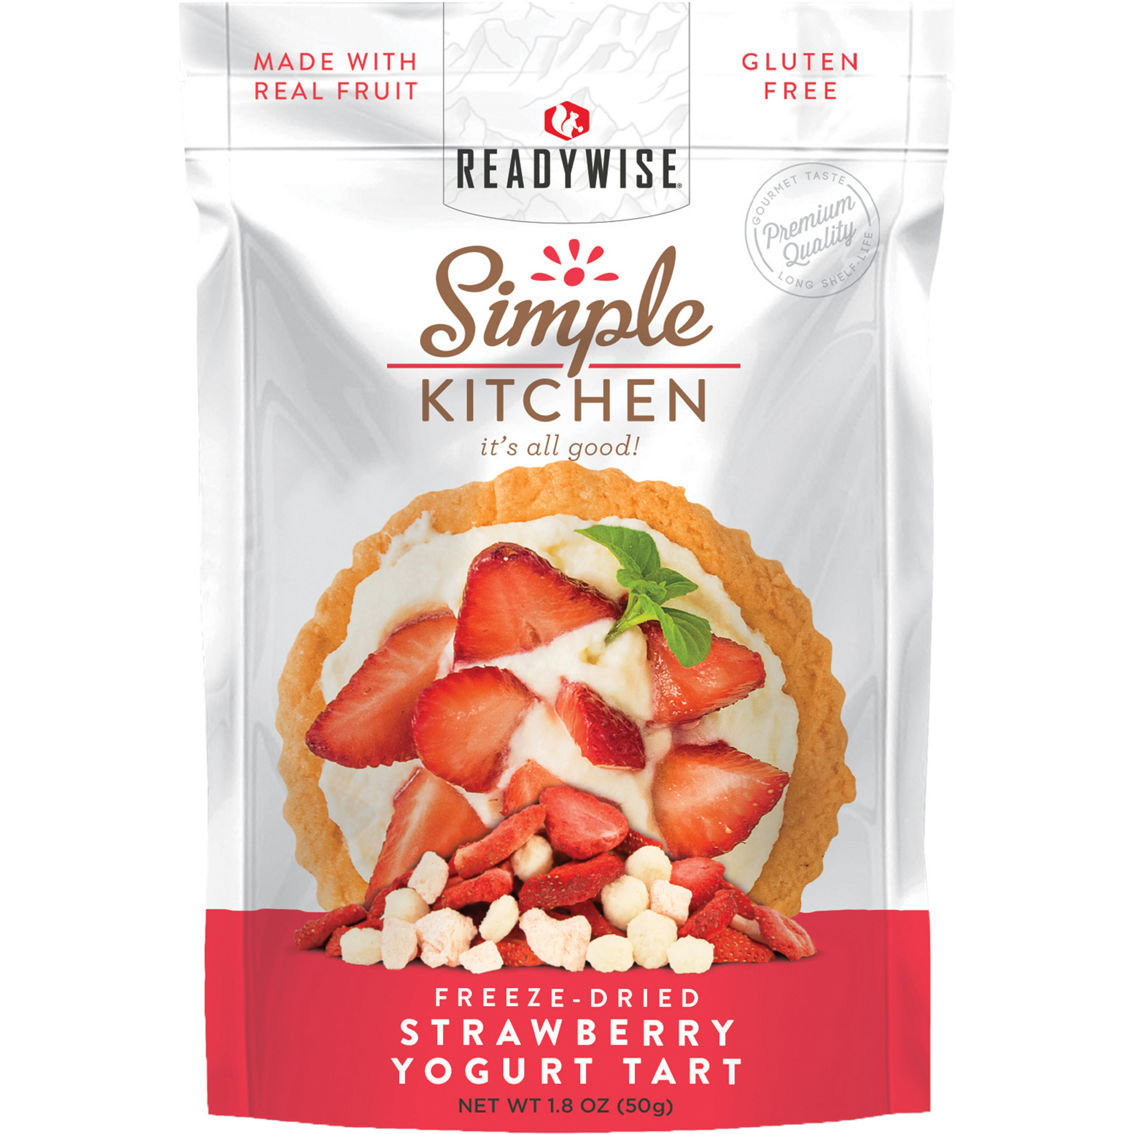 ReadyWise Simple Kitchen Sweet Treat Variety Pack 4 pk. - Image 9 of 10